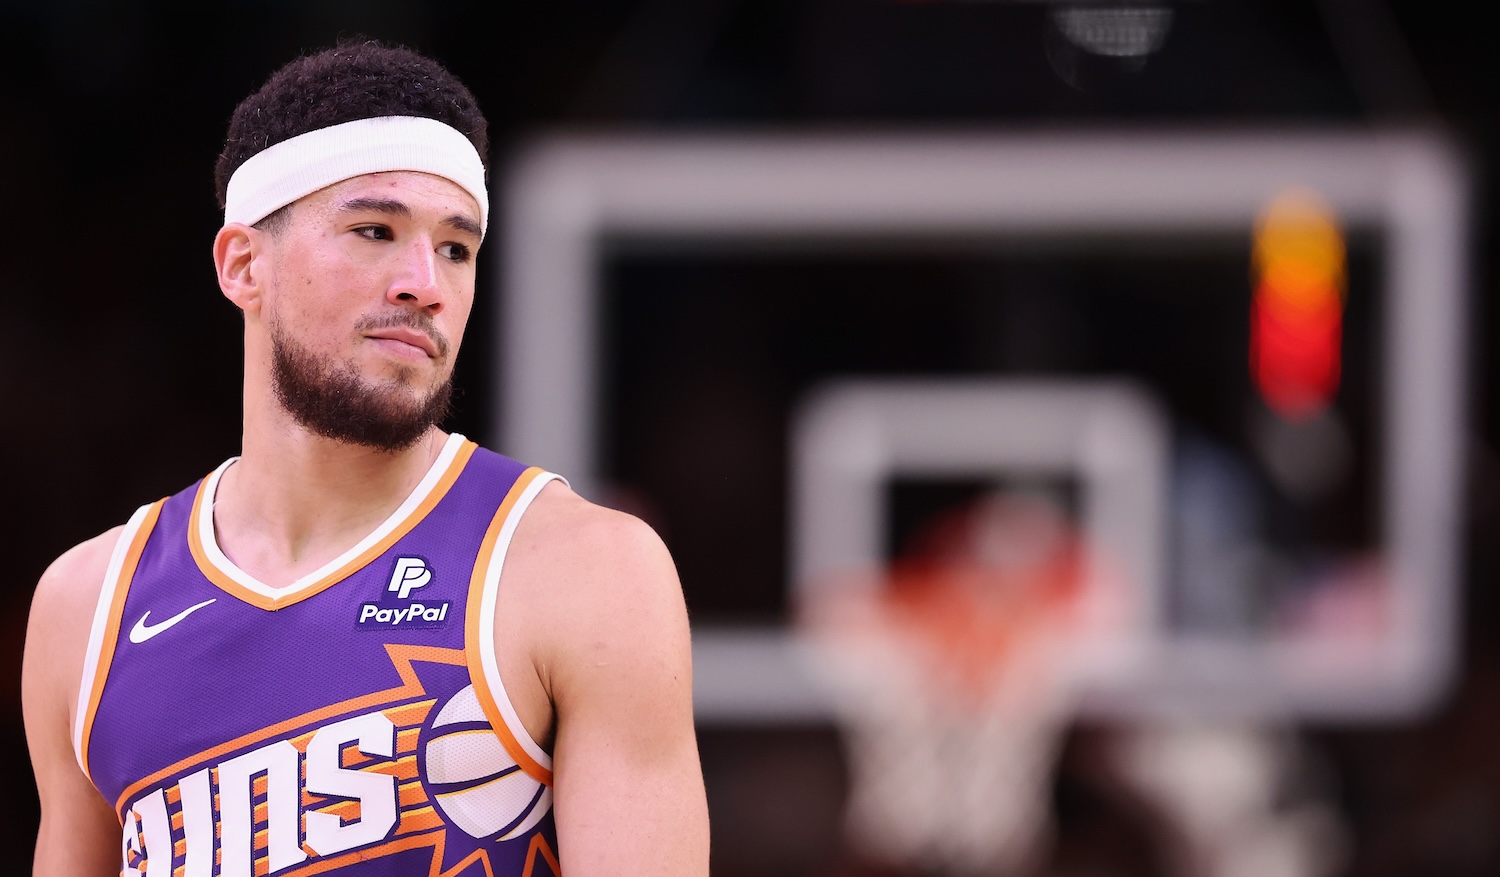 PHOENIX, ARIZONA - APRIL 09: Devin Booker #1 of the Phoenix Suns reacts during the second half of the NBA game against the LA Clippers at Footprint Center on April 09, 2024 in Phoenix, Arizona. NOTE TO USER: User expressly acknowledges and agrees that, by downloading and or using this photograph, User is consenting to the terms and conditions of the Getty Images License Agreement. (Photo by Christian Petersen/Getty Images)